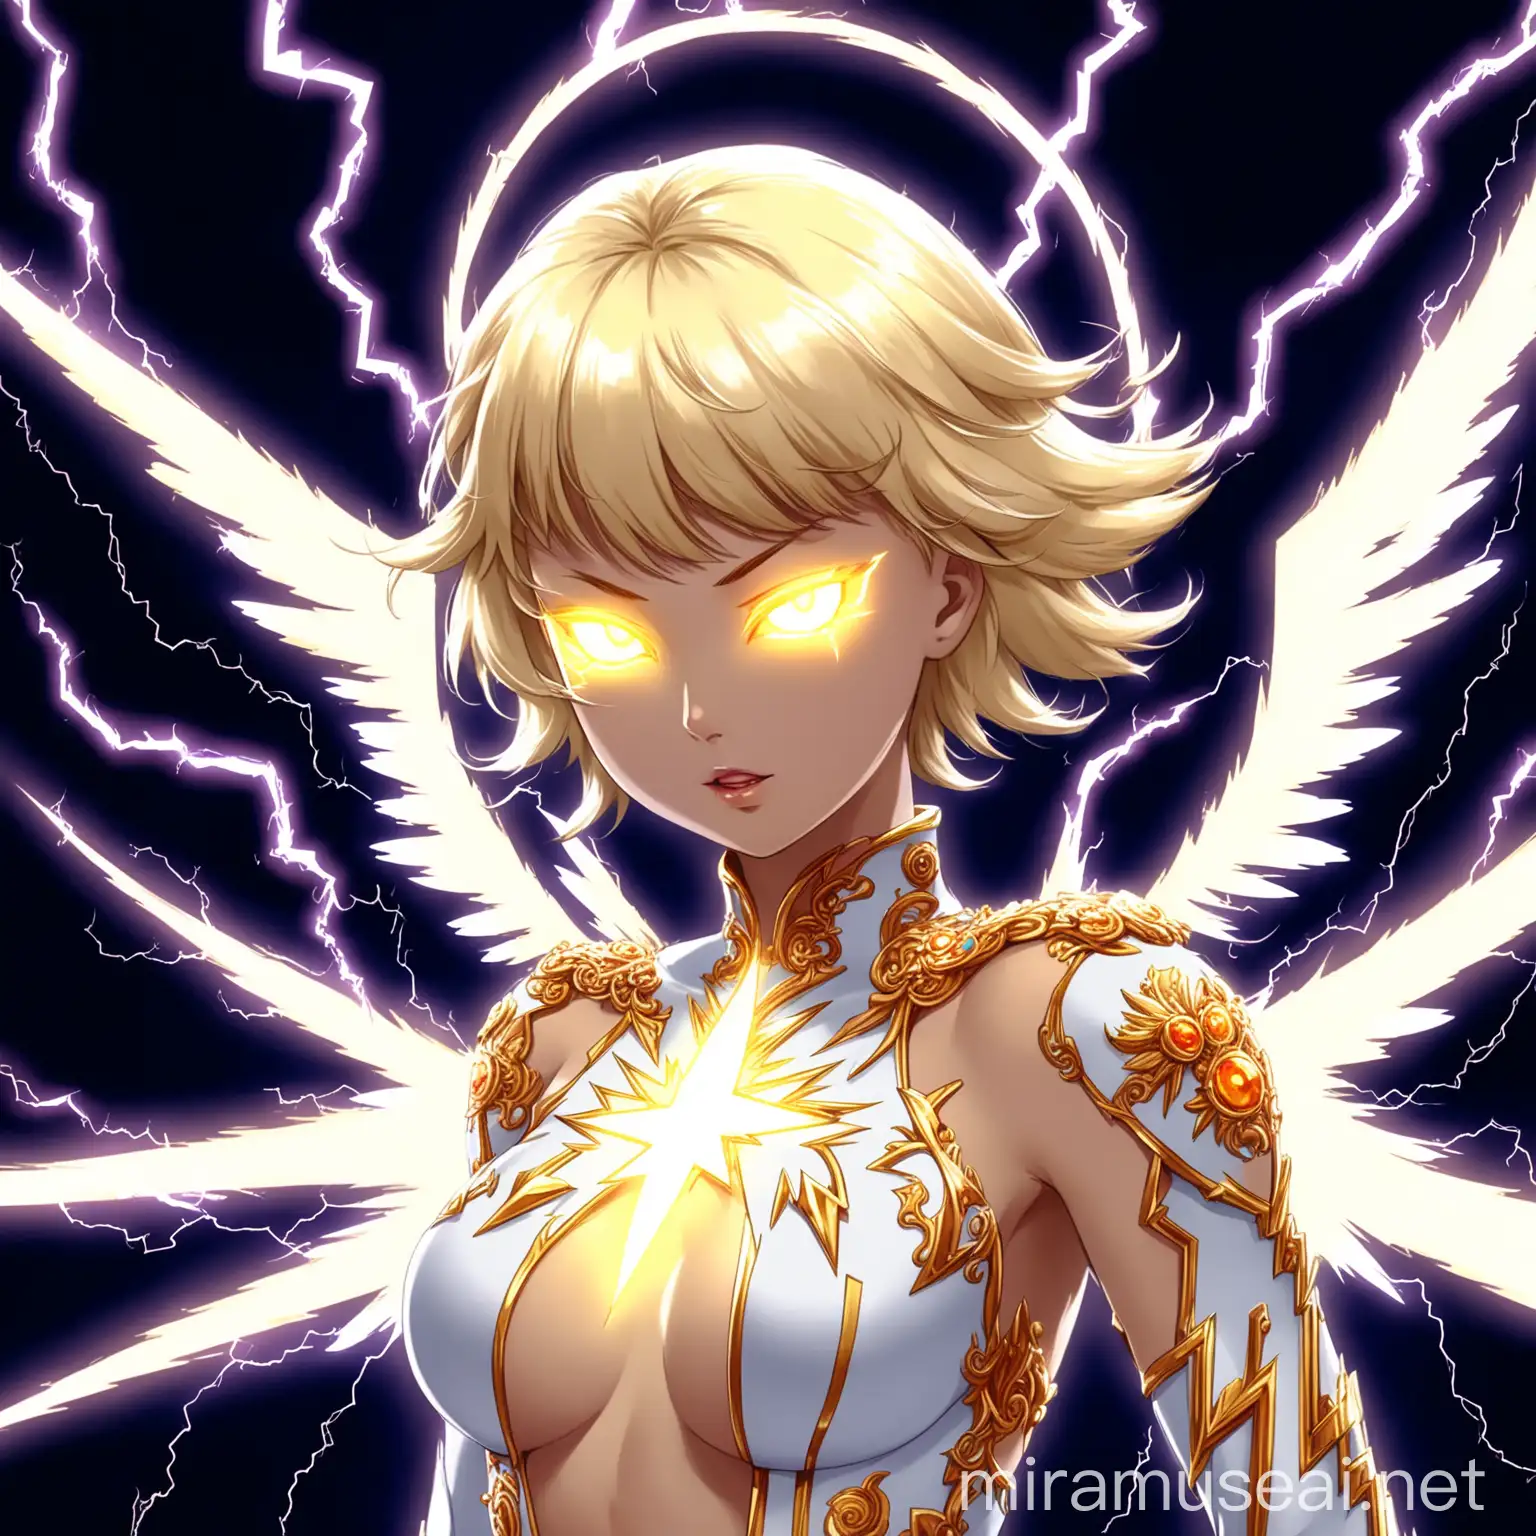 Radiant Angel Woman with Lightning Wings Anime Style Character with Luminous Features